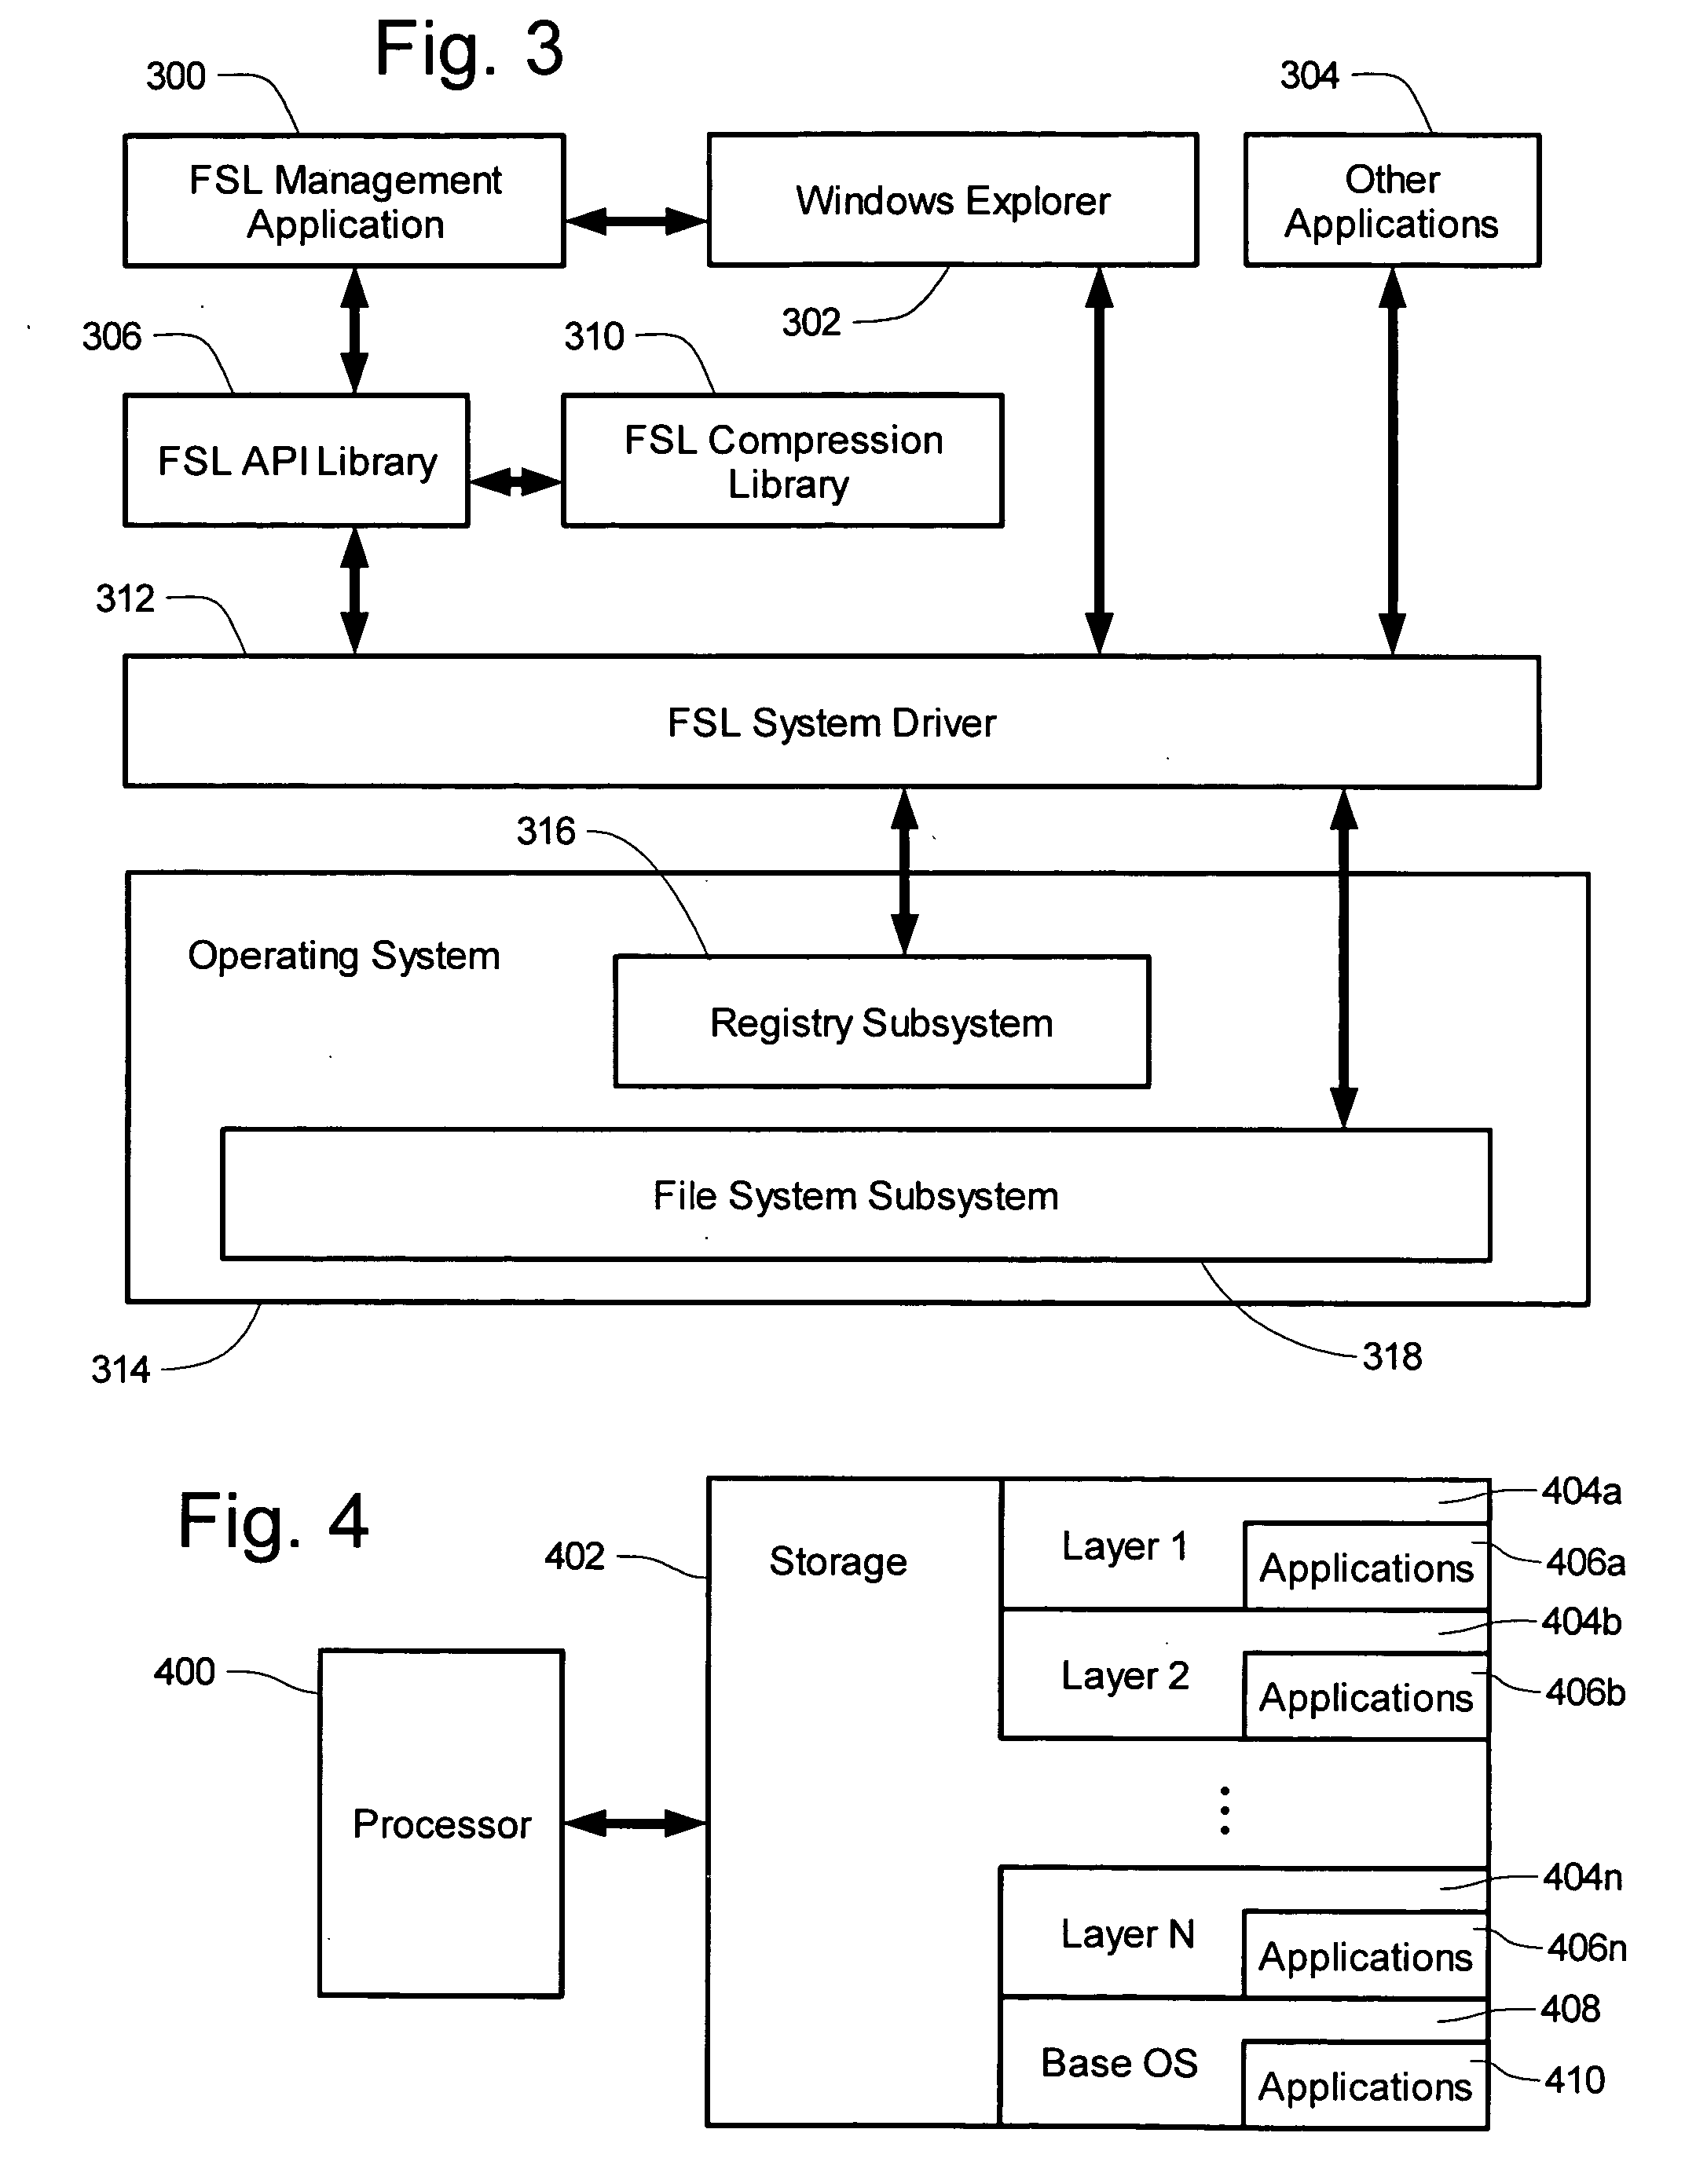 Intrusion protection system utilizing layers and triggers